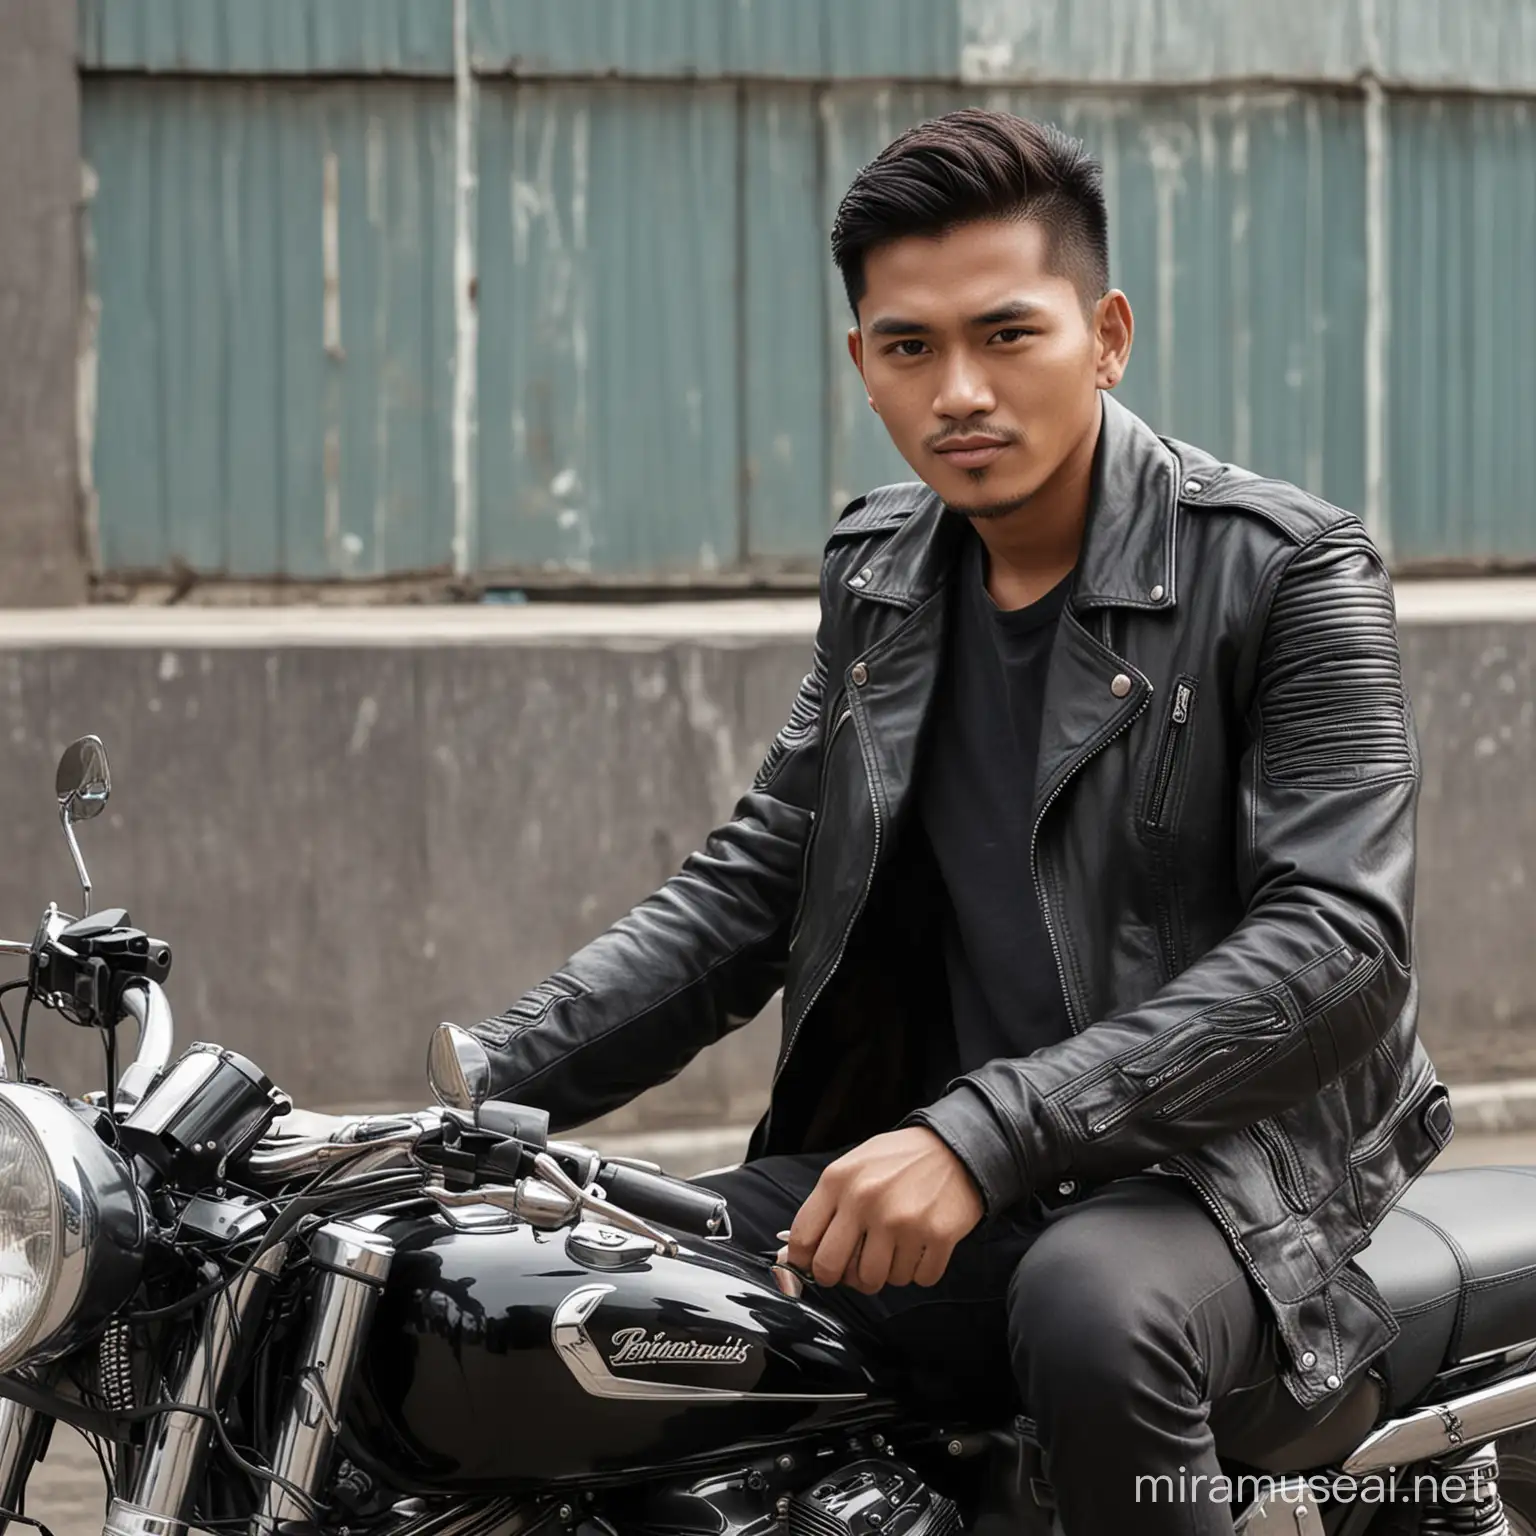 A photo 25 years old indonesian men with leather jacket sit in motorcycle